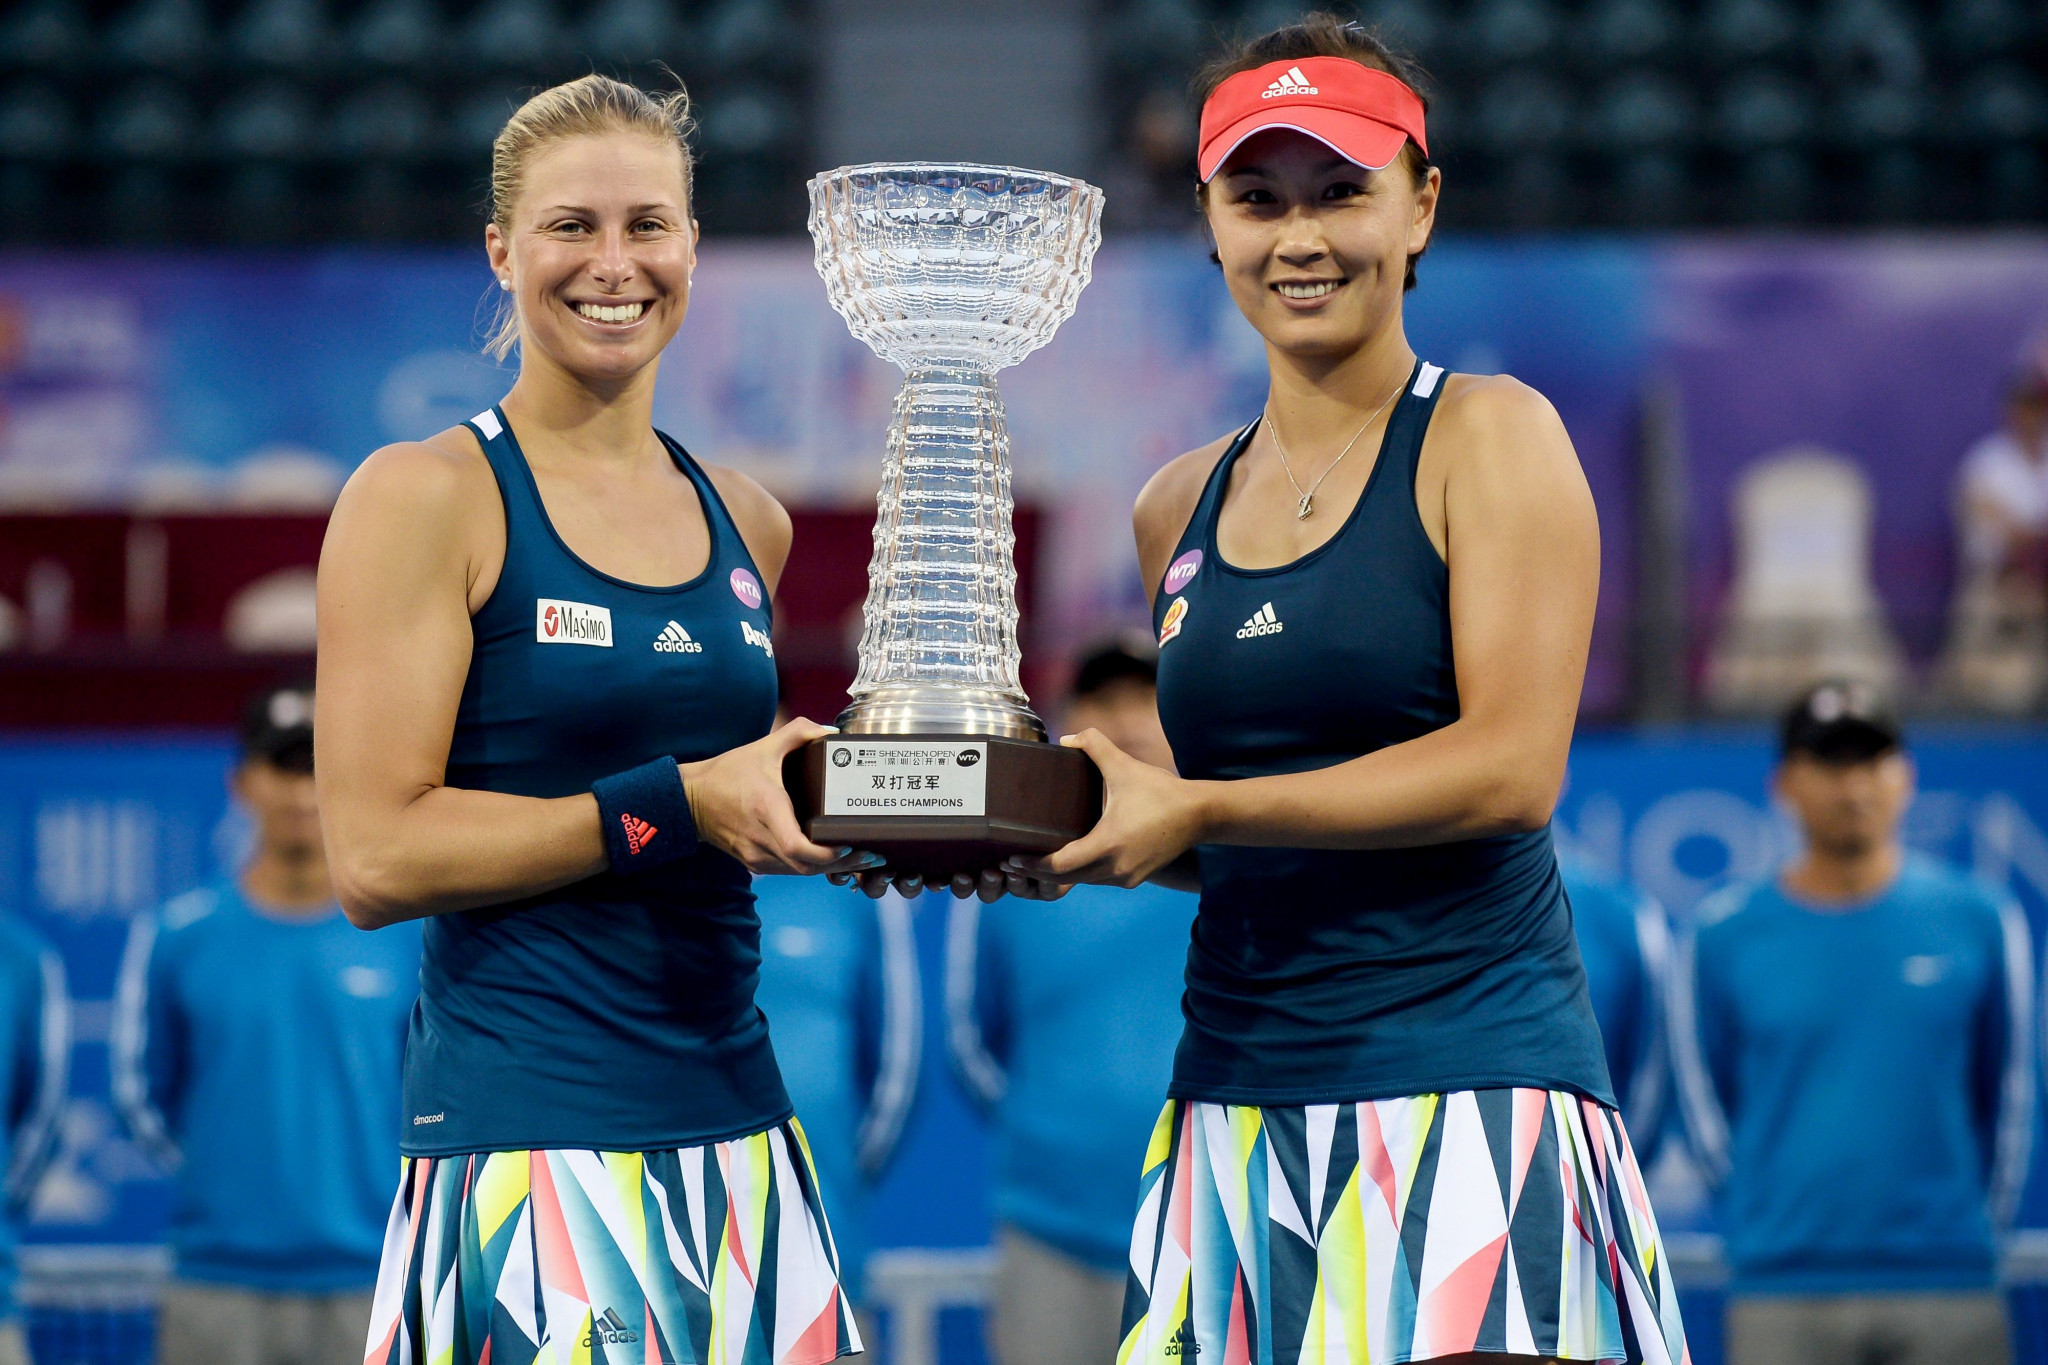 Peng Shuai, right, is a two-time doubles champion at the Shenzhen Open, winning the event with Andrea Hlavackova, left, in 2017 and Yang Zhaoxuan in 2019 ©Getty Images